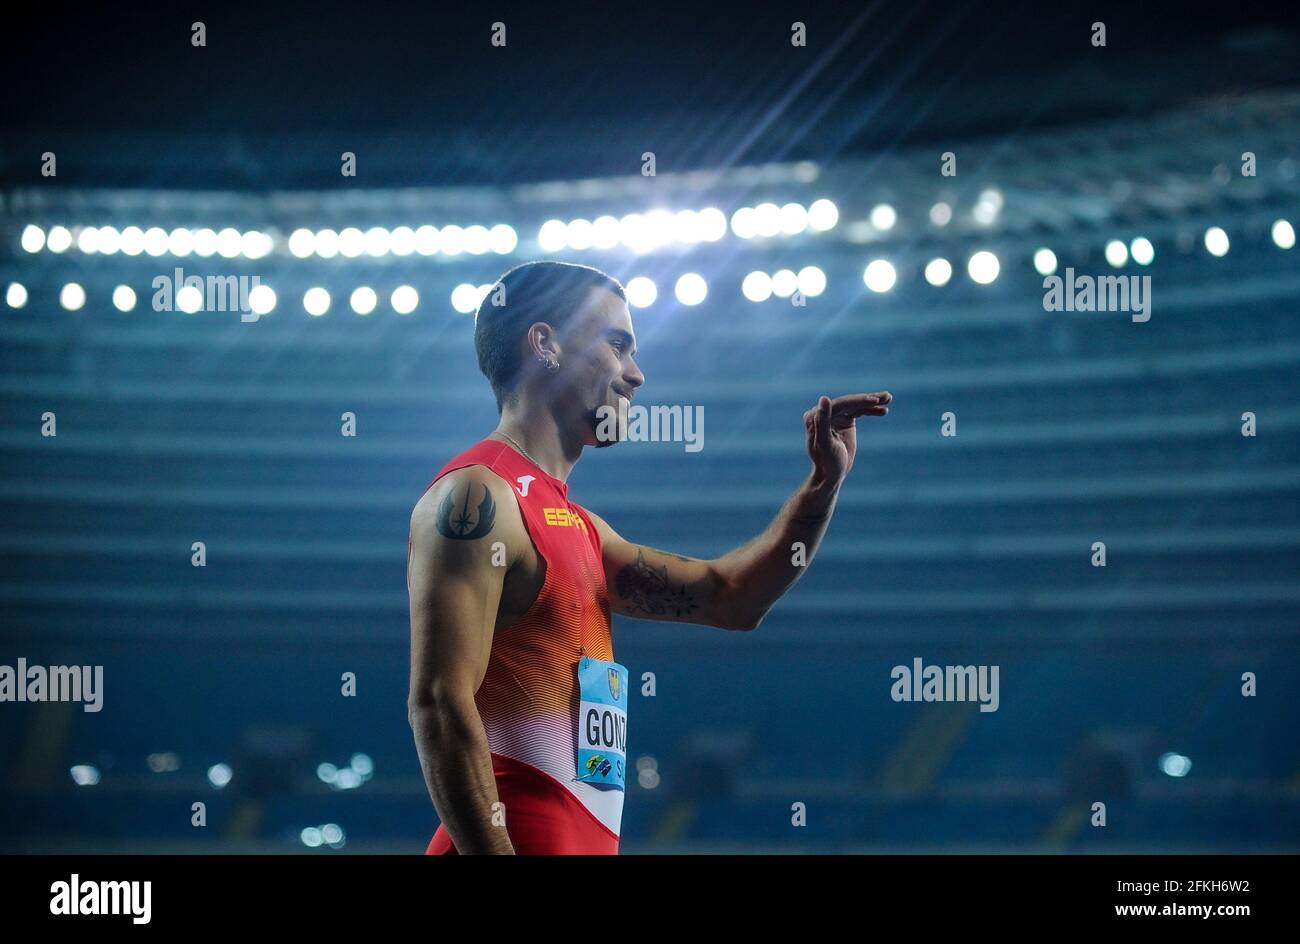 Chorzow, Polan. 1st May, 2021. Jose Gonzales of Spain reacts during the 4x100 meters Relay Men of the World Athletics Relays Silesia21 in Chorzow, Polan, May 1, 2021. Credit: Rafal Rusek/Xinhua/Alamy Live News Stock Photo